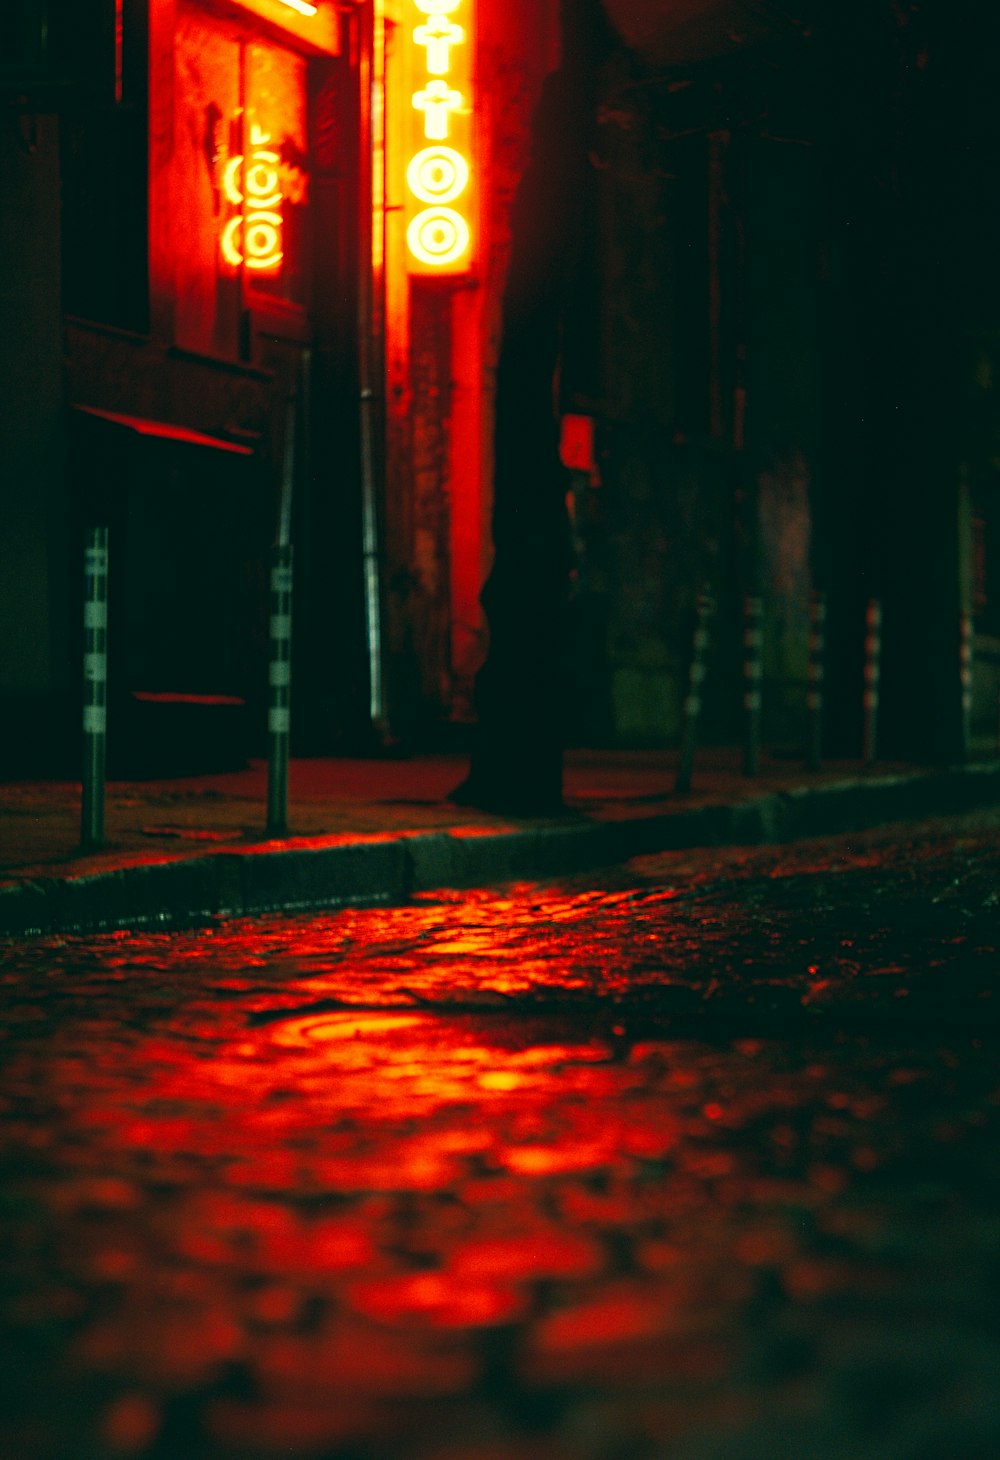 a red light shines on a city street at night